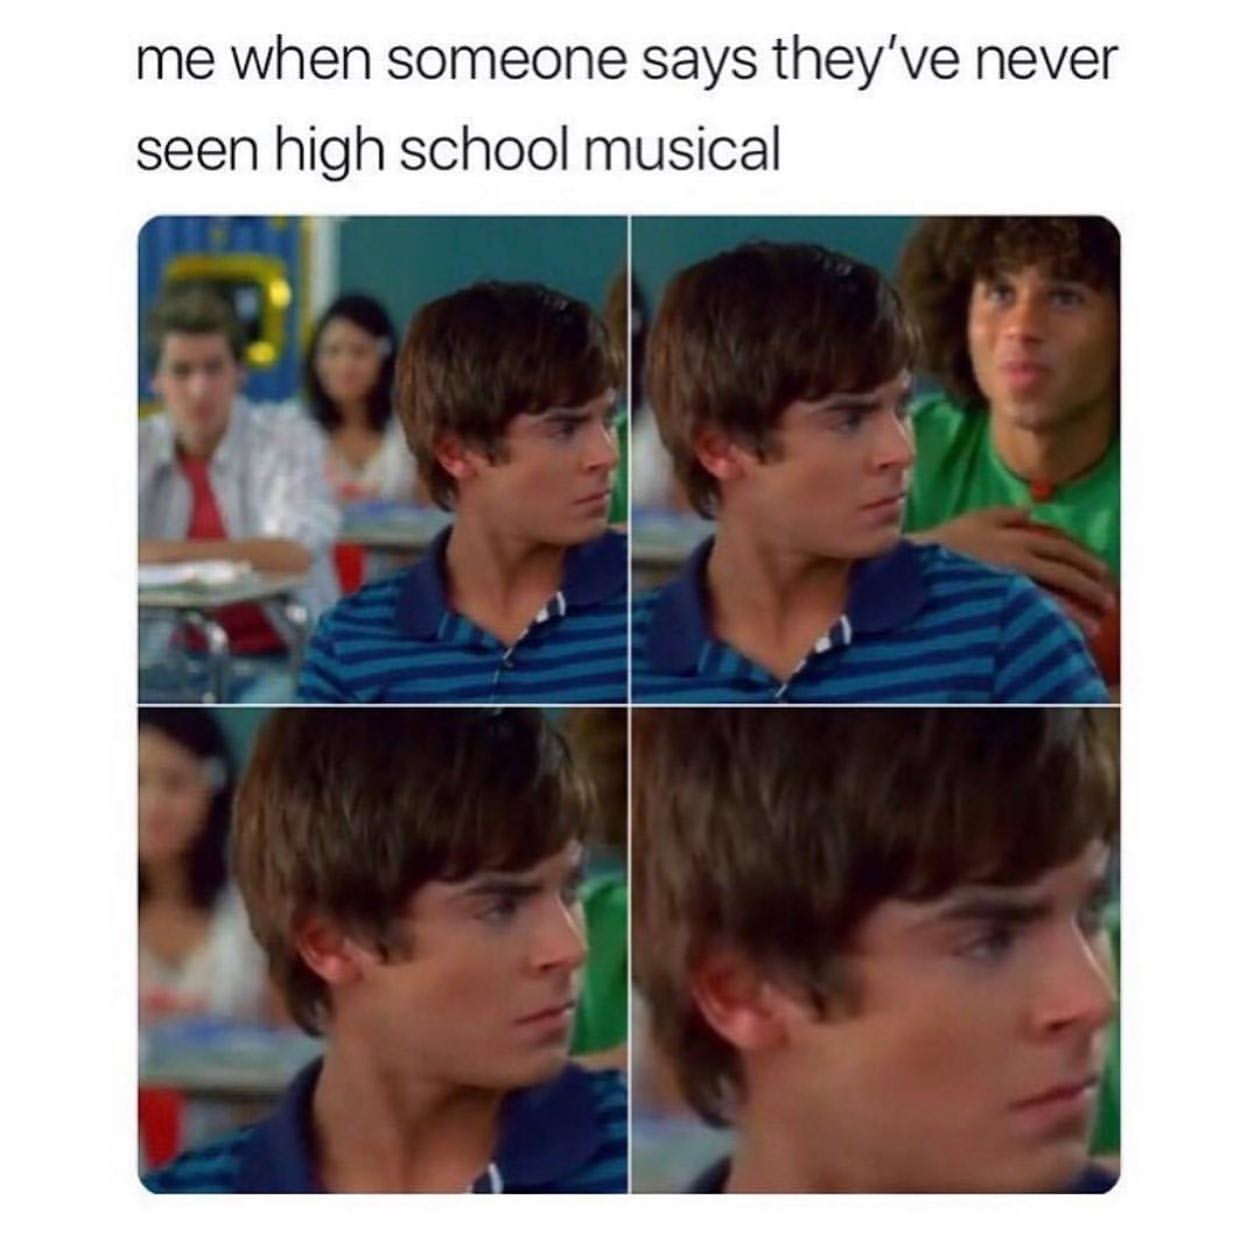 When says they've never seen high school musical. - Funny